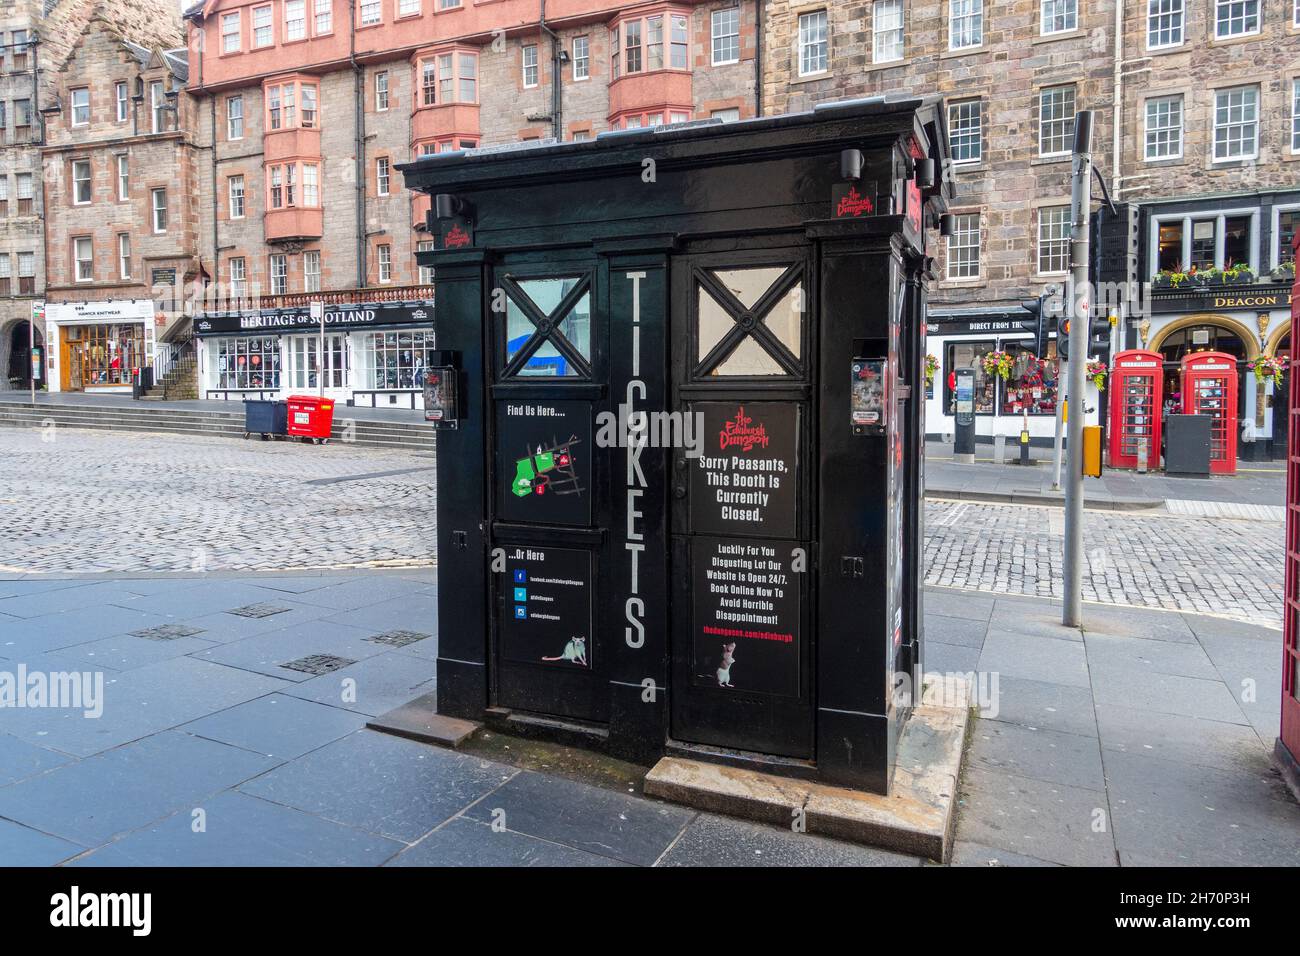 Old Vintage Police Phone Box Now A Ticket Booth For Edinburgh Dungeon Tours In Lawnmarket Edinburgh Old Town Scotland Stock Photo